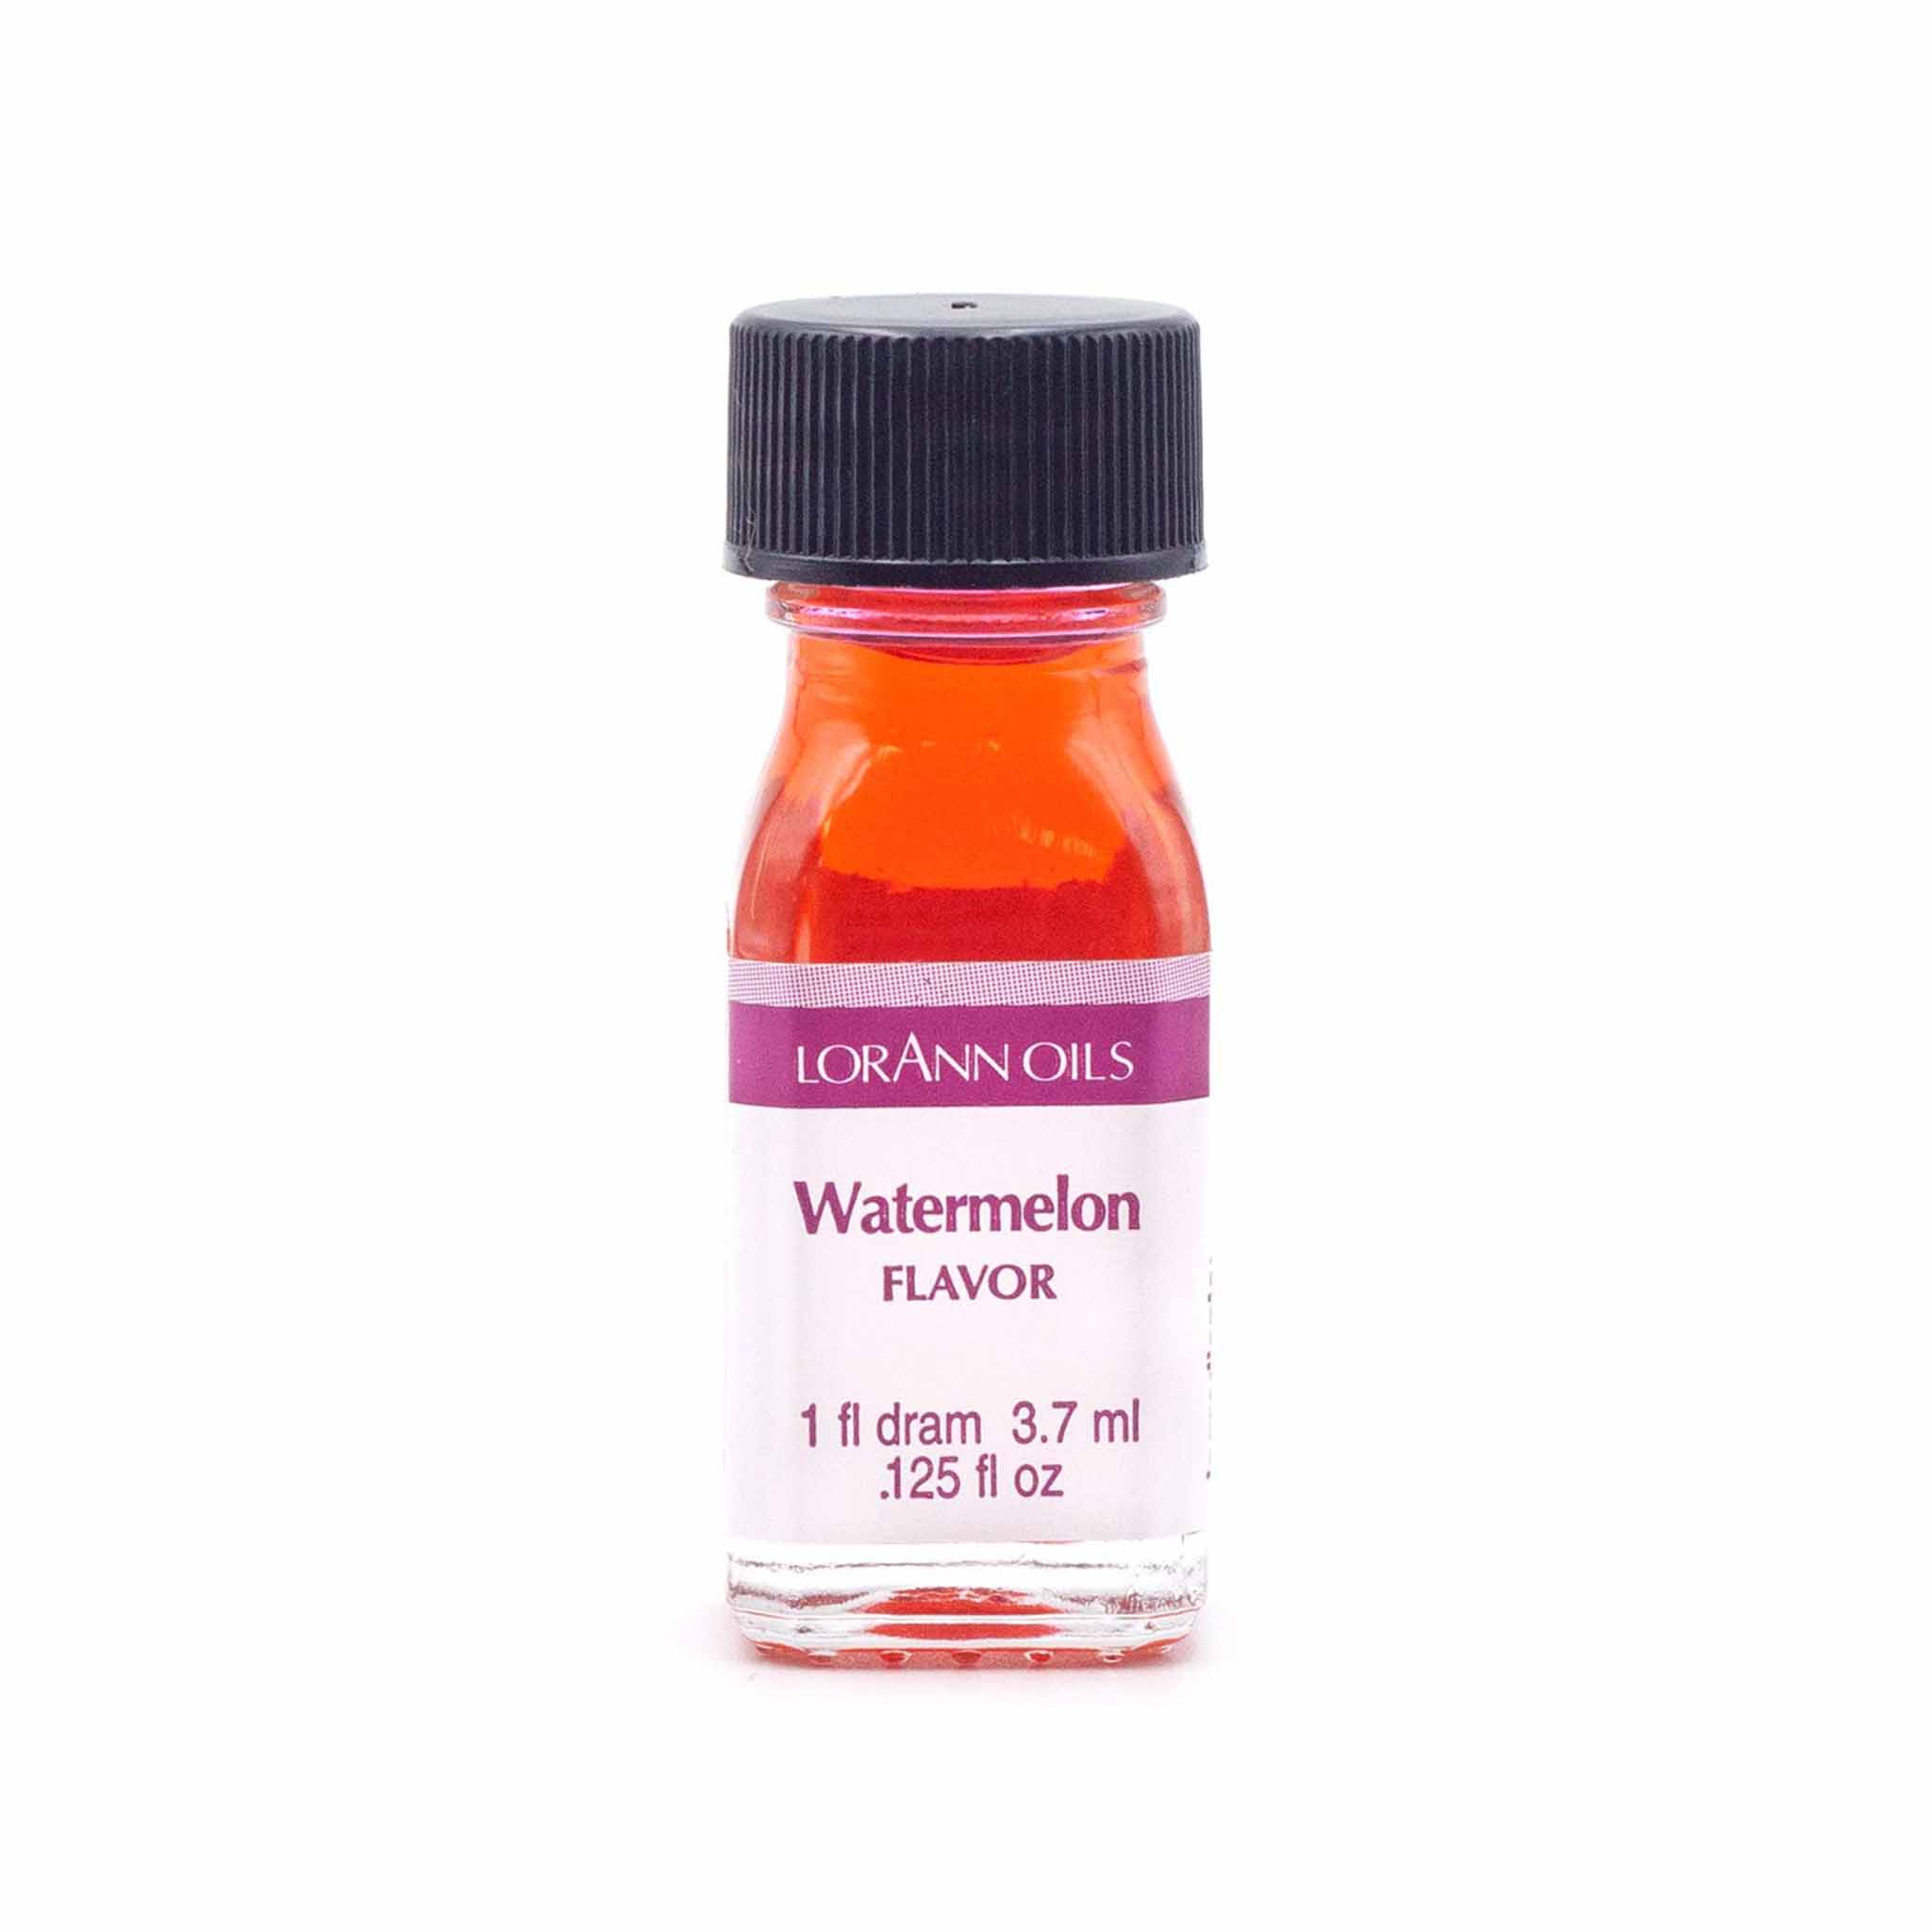 Watermelon Flavor for Baking, Making Candies, and Adding to Cocktails